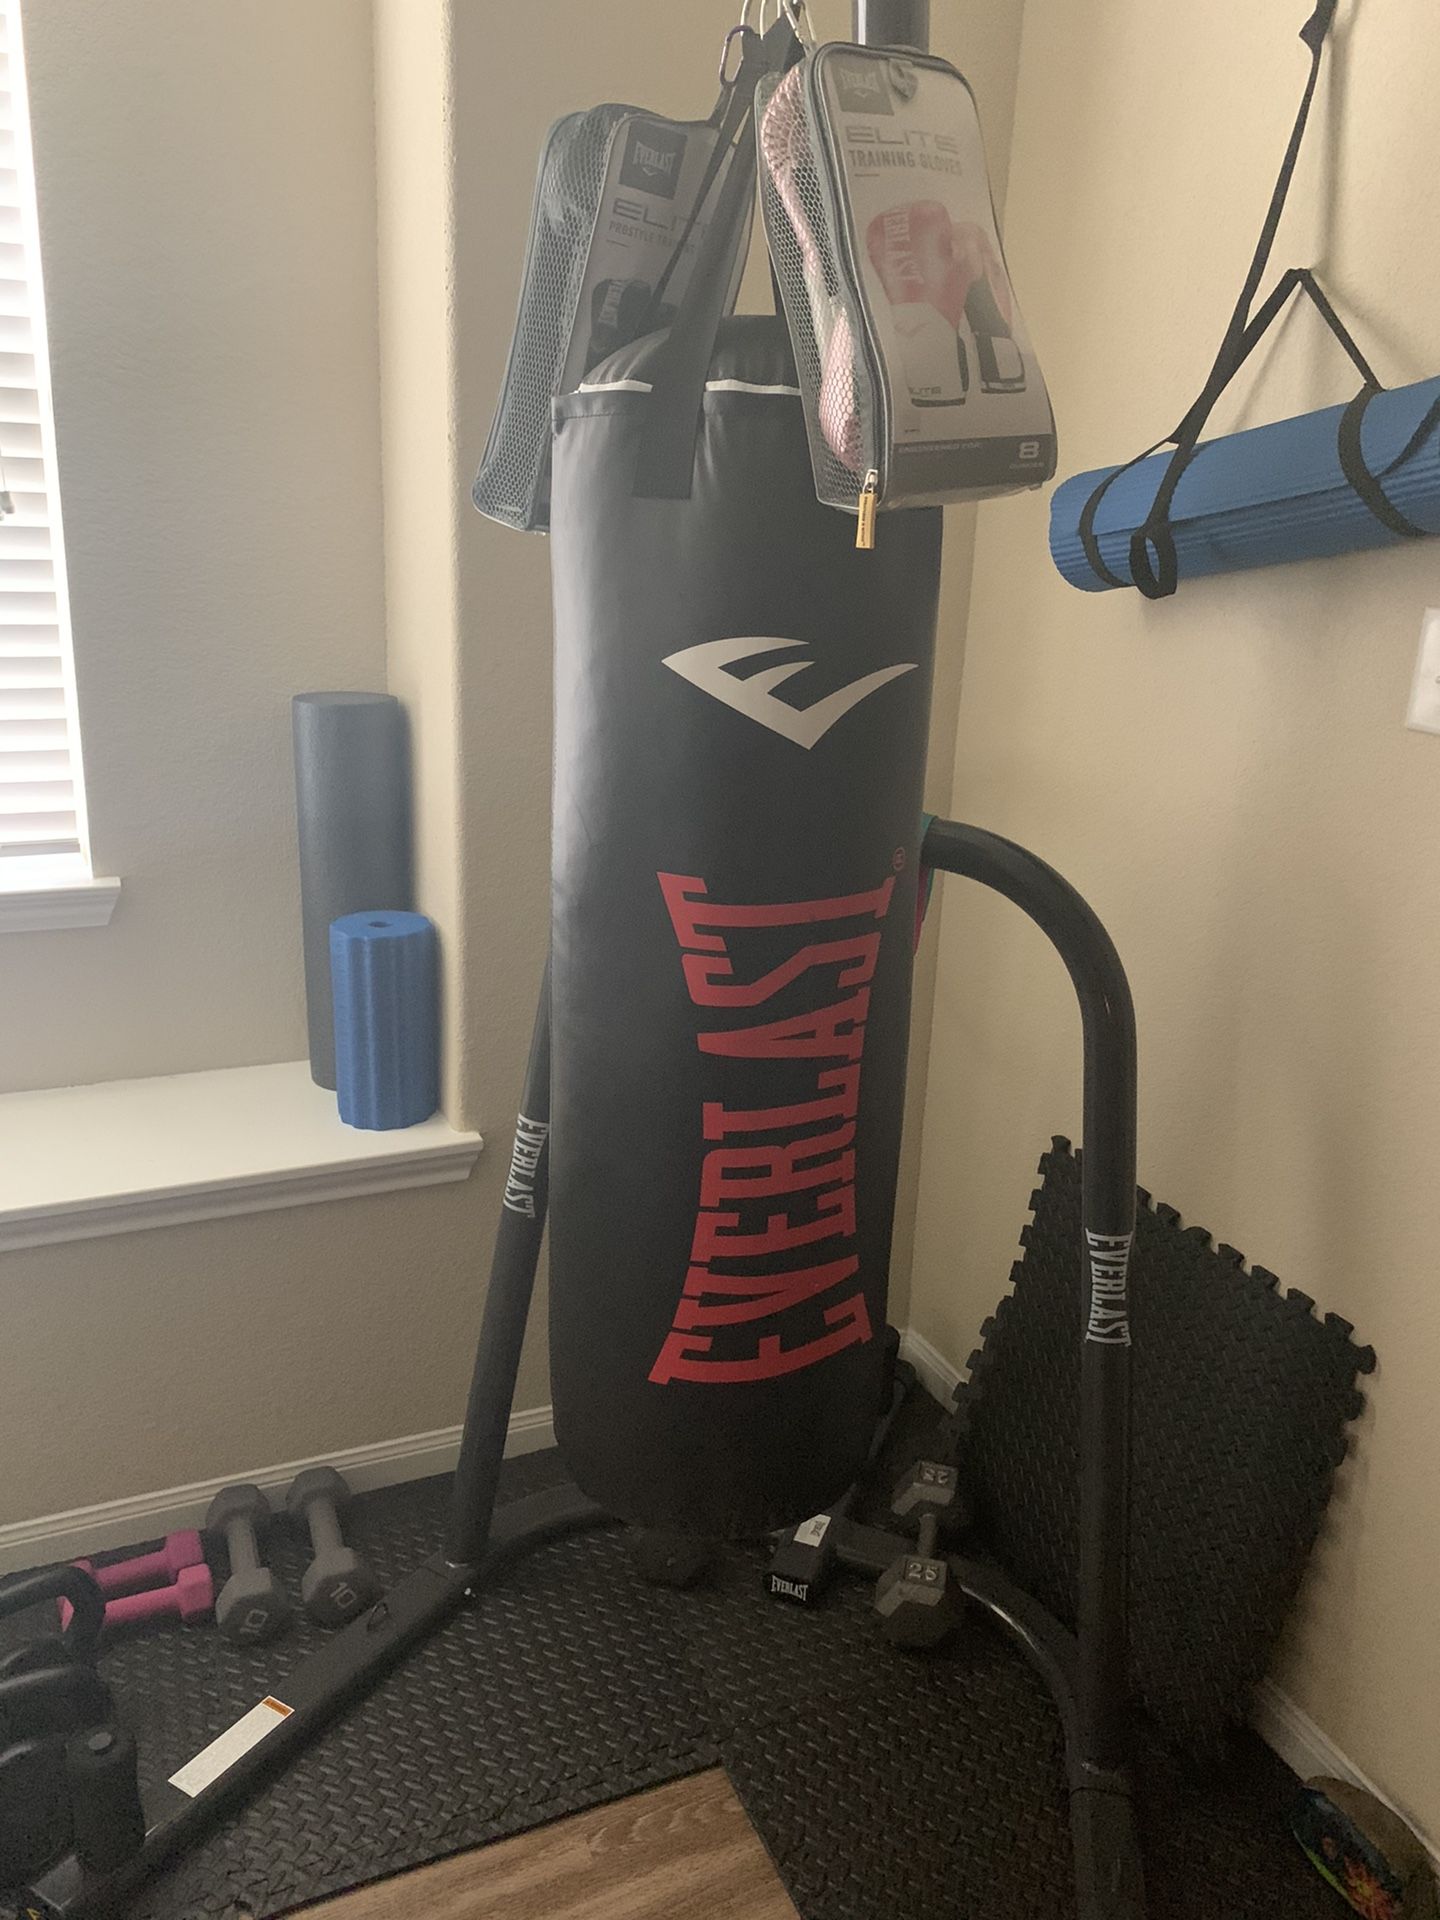 Everlast punching bag and gloves!